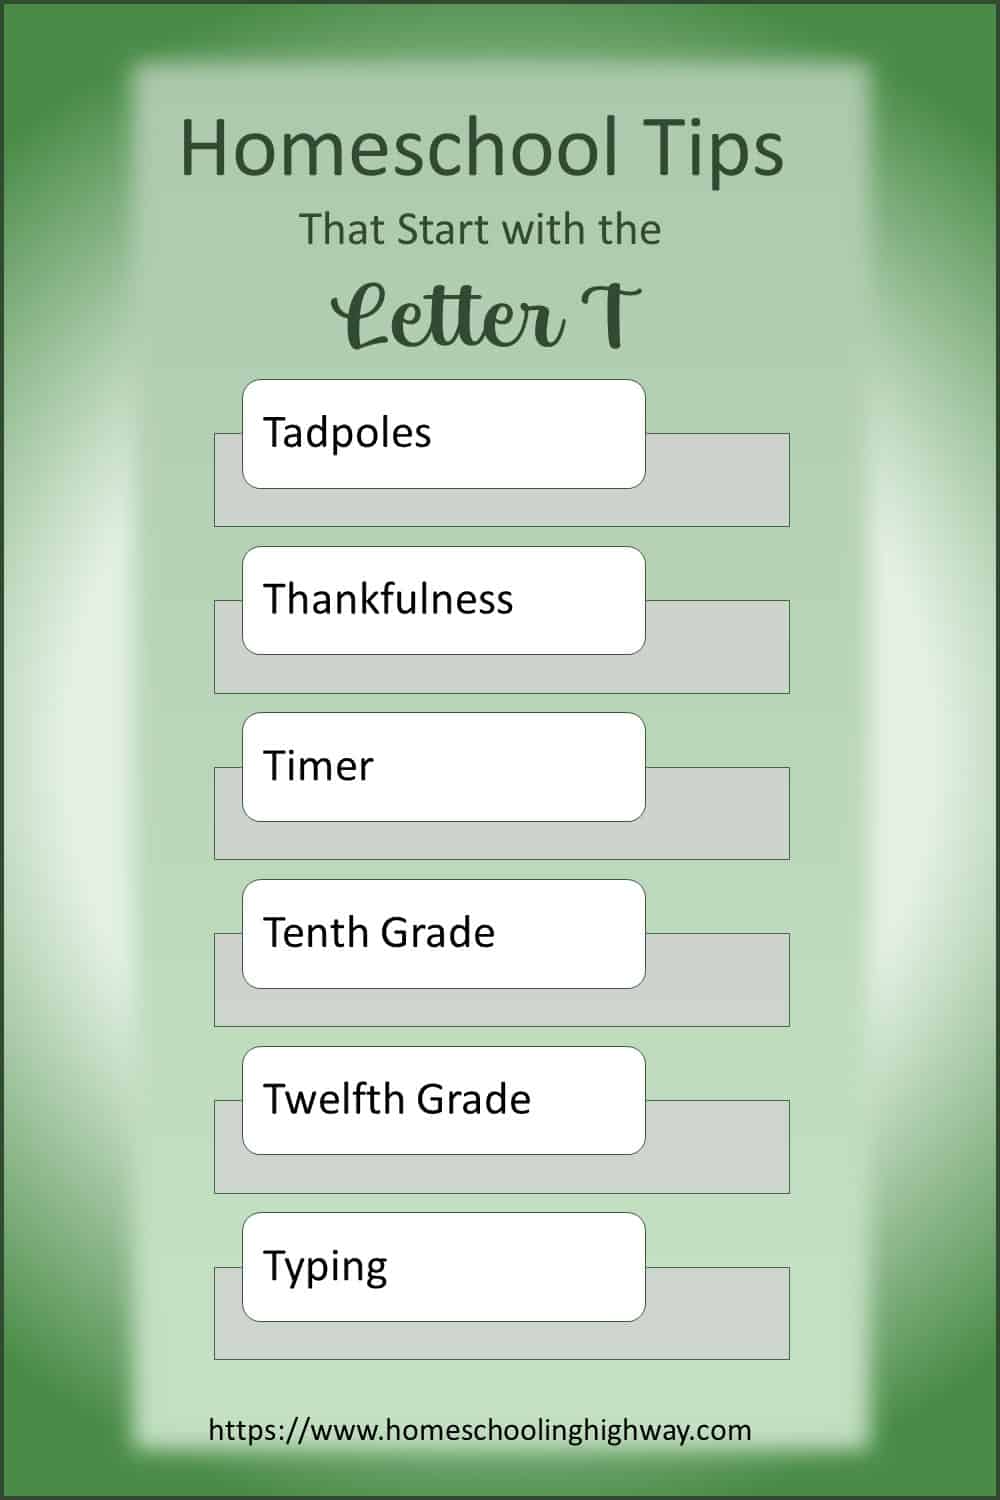 Homeschooling Tips That Start With T. Tadpoles, Thankfulness, Timer, Tenth Grade, Twelfth Grade, Typing